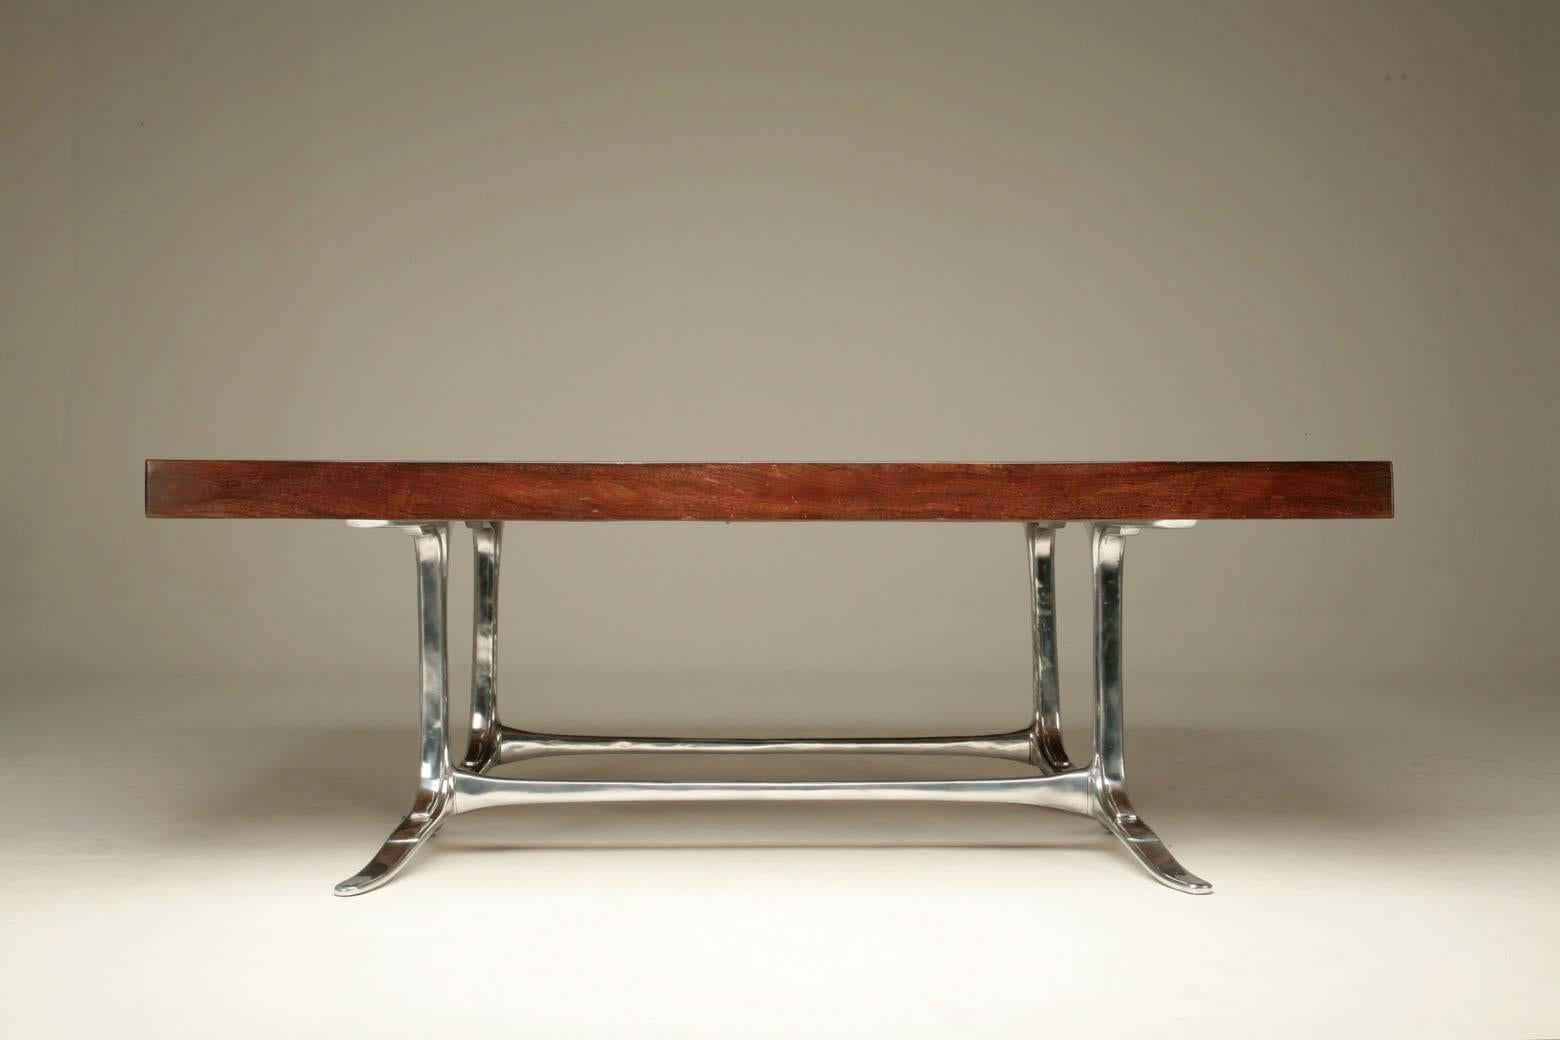 Pair of Tables, Antique Hardwood on Sand-Cast Aluminum Base, by P. Tendercool For Sale 2